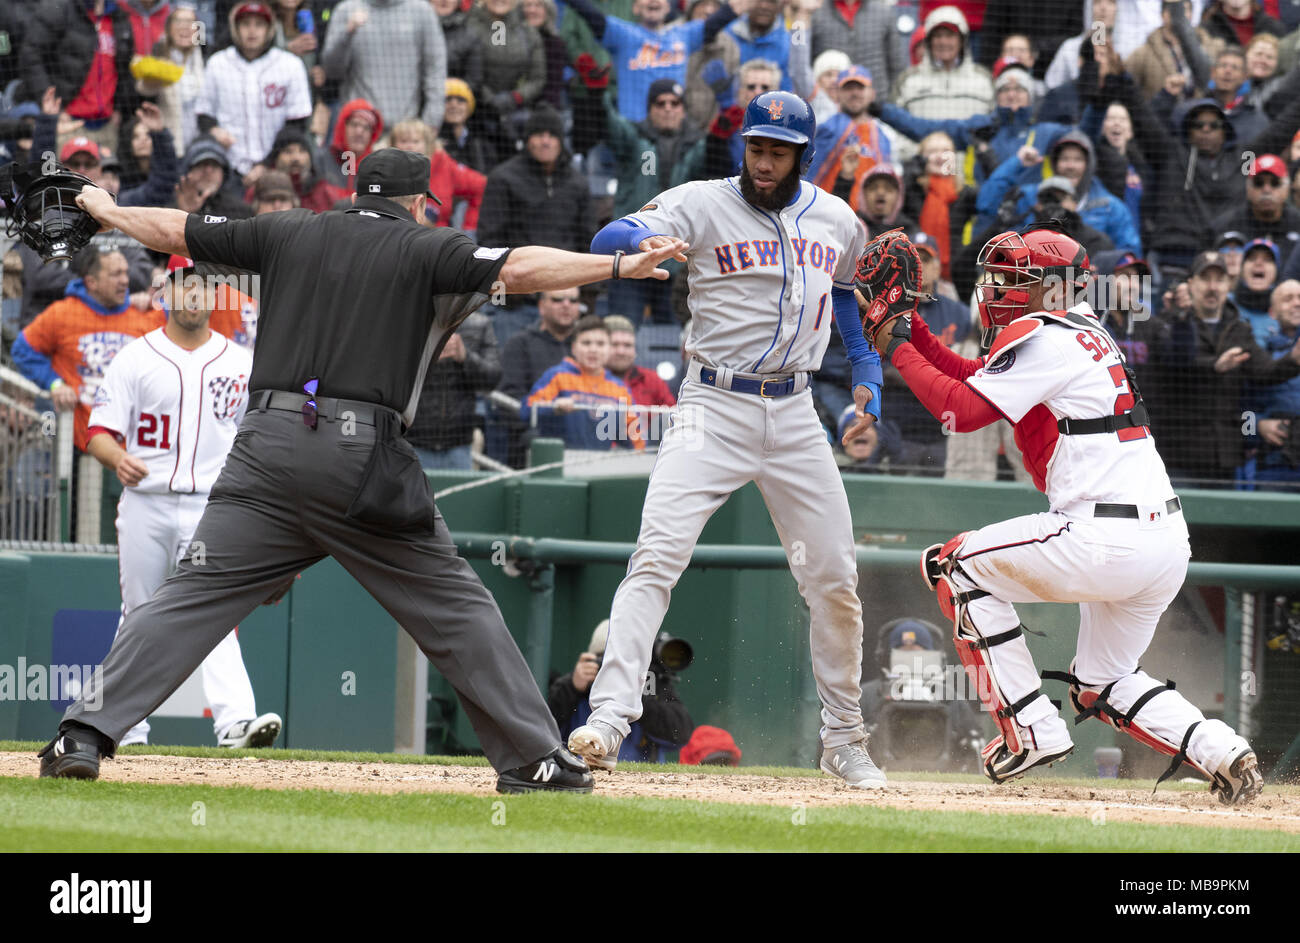 Washington, District of Columbia, USA. 7th Apr, 2018. Home plate umpire Marty Foster (60), left calls New York Mets shortstop Amed Rosario (1), center, safe after he scored on an Asdrubal Cabrera double in the seventh inning against the Washington Nationals at Nationals Park in Washington, DC on Saturday April 7, 2018. Washington Nationals catcher Pedro Severino (29), right, defends on the play. The Mets won the game 3-2.Credit: Ron Sachs/CNP. Credit: Ron Sachs/CNP/ZUMA Wire/Alamy Live News Stock Photo